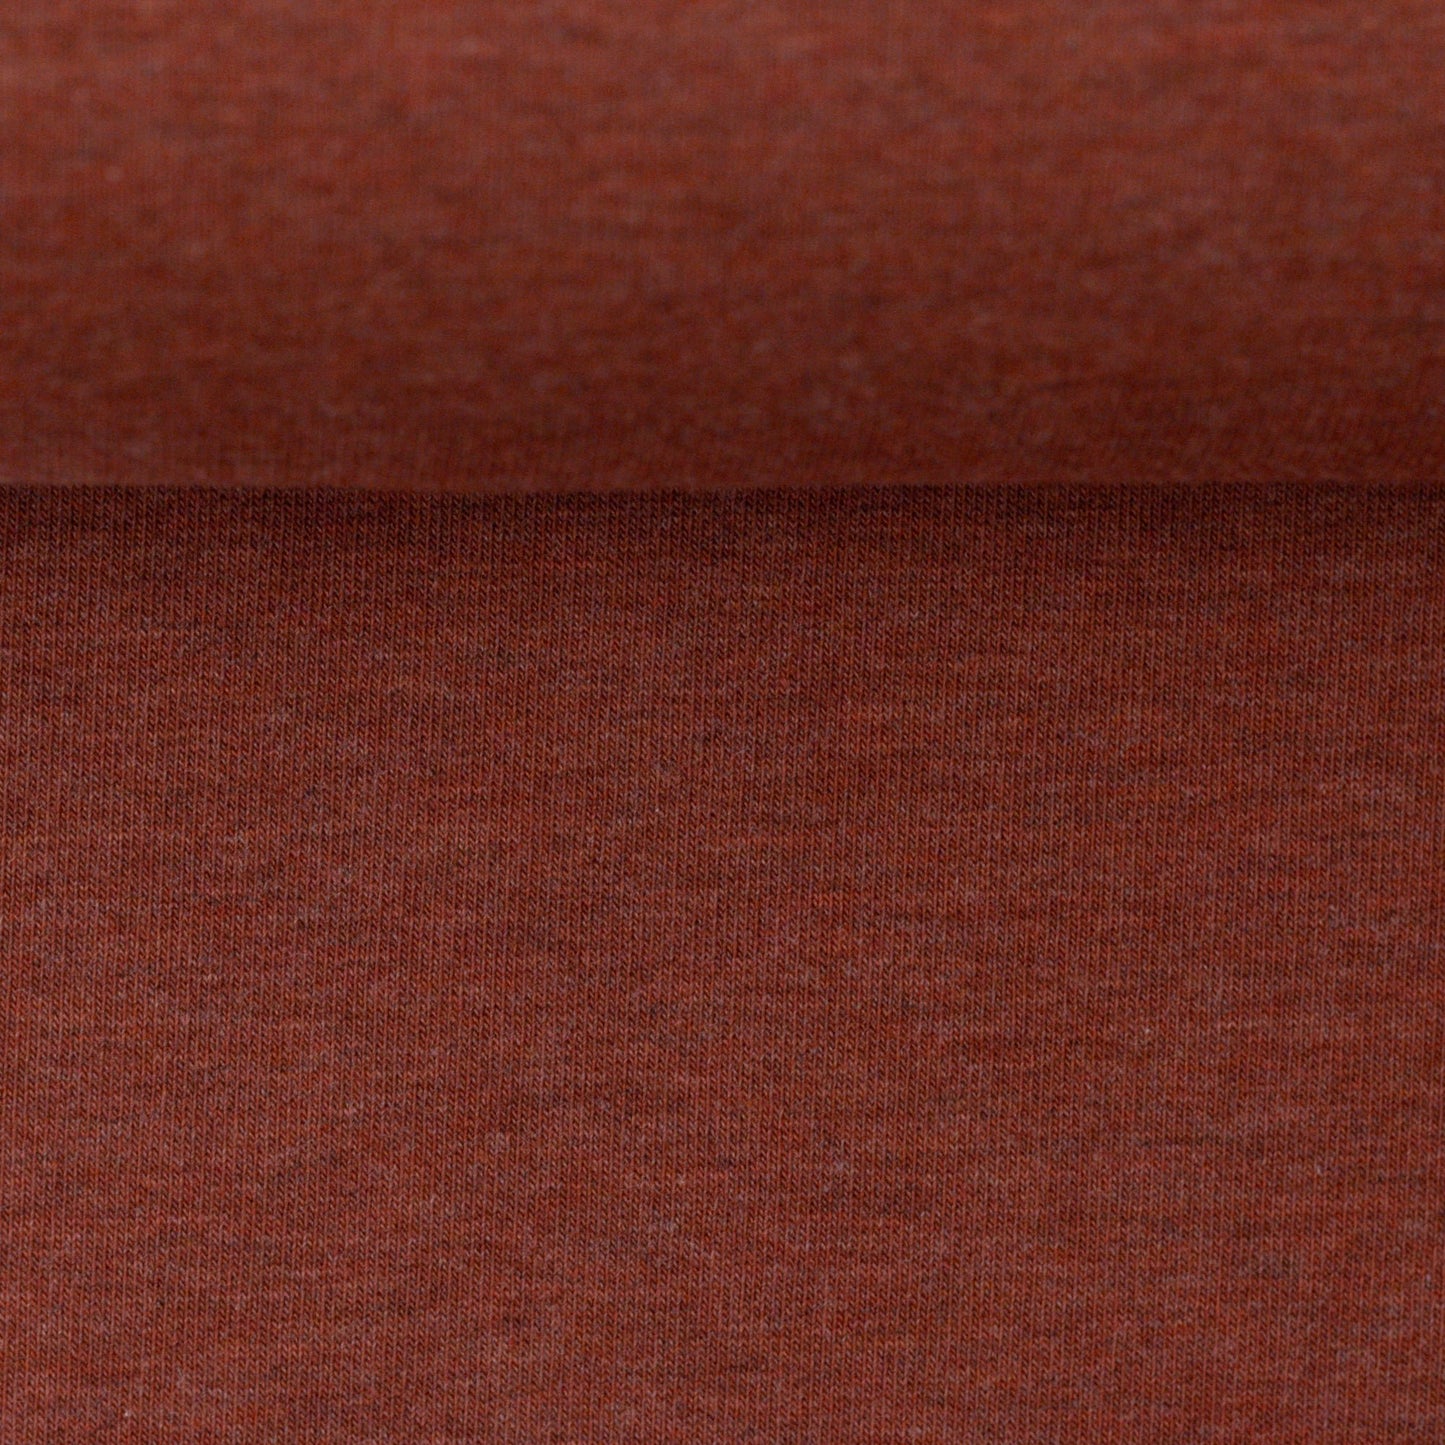 Swafing - Melange - Burgundy - Euro-ribbing - Jersey - French Terry - Fleeced French Terry - 1339 - Little Rhody Sewing Co.